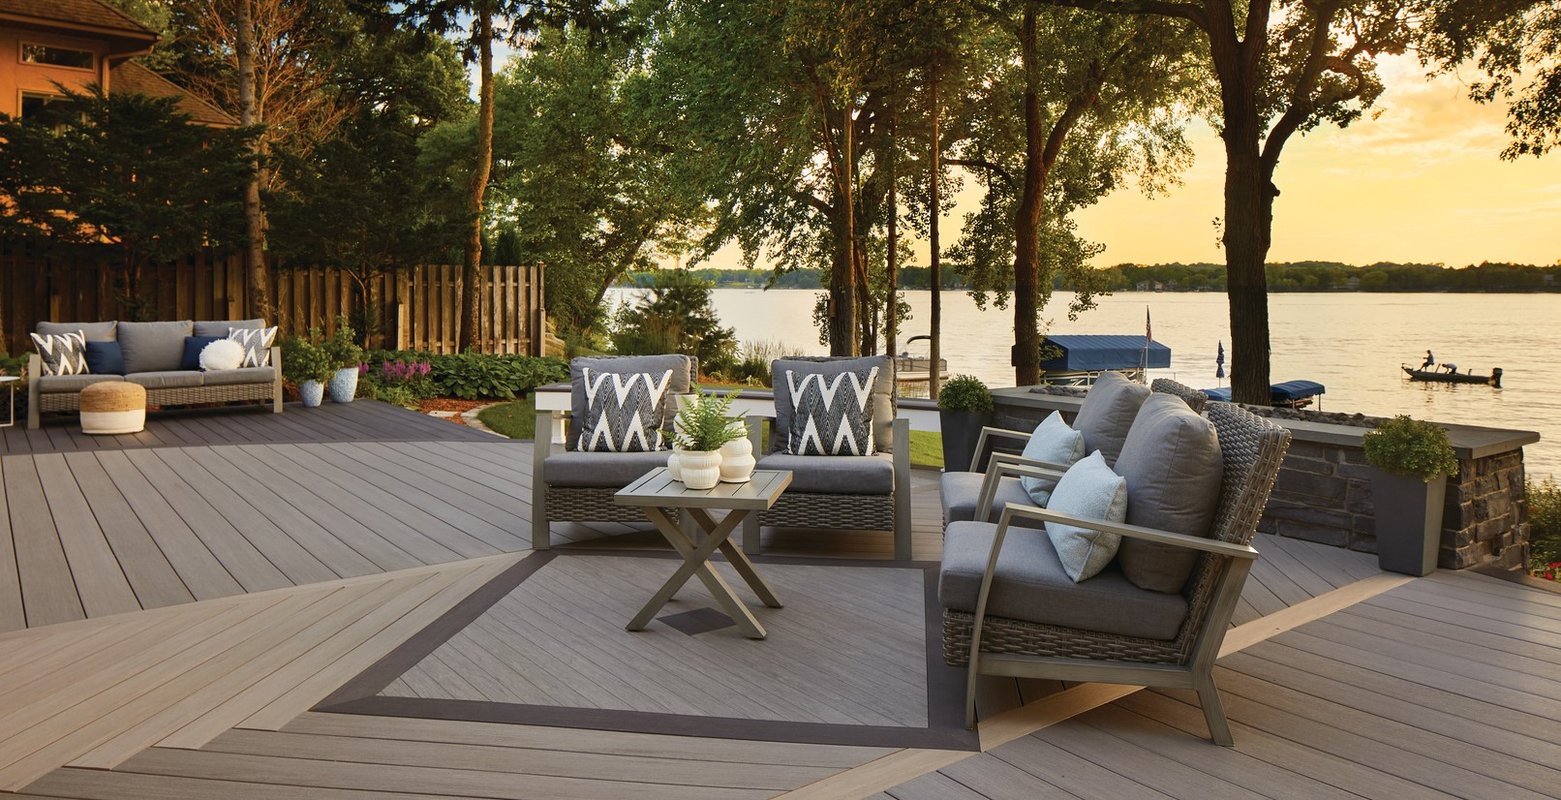 An outdoor deck overlooking a view of a lake surrounded by trees, is tiled with brown and grey woodwork, along with matching patio furniture during the afternoon